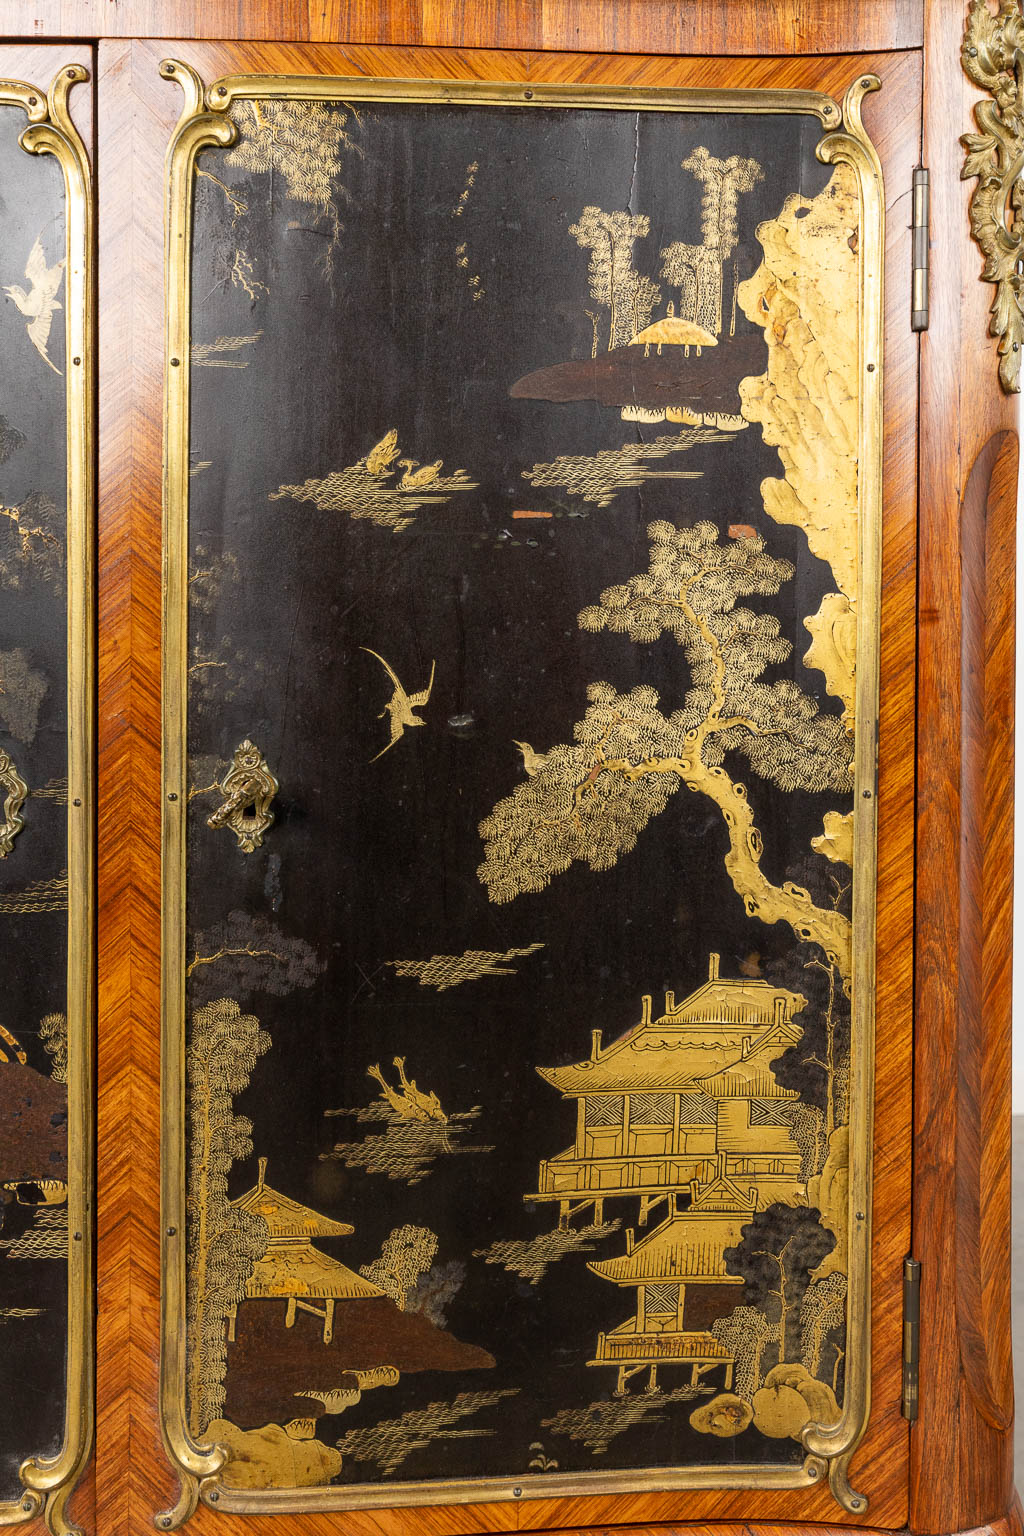 A fine Louis XV cabinet, Chinese lacquer and rosewood veneer, signed Adrien Delorme. 18th C. (D:47 x W:81 x H:117 cm)